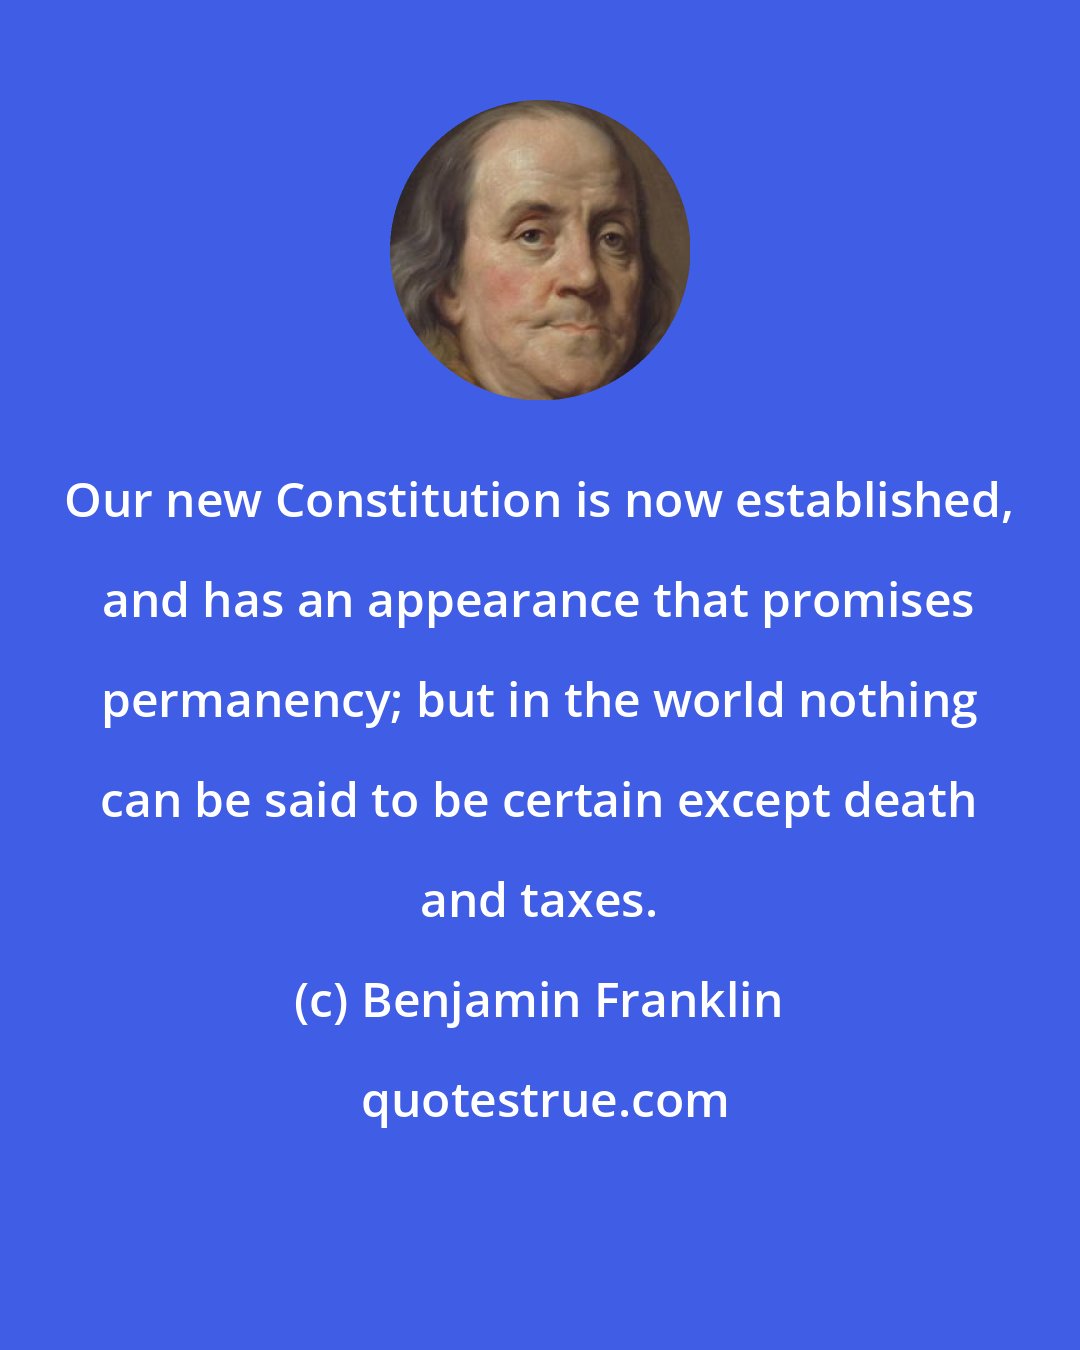 Benjamin Franklin: Our new Constitution is now established, and has an appearance that promises permanency; but in the world nothing can be said to be certain except death and taxes.